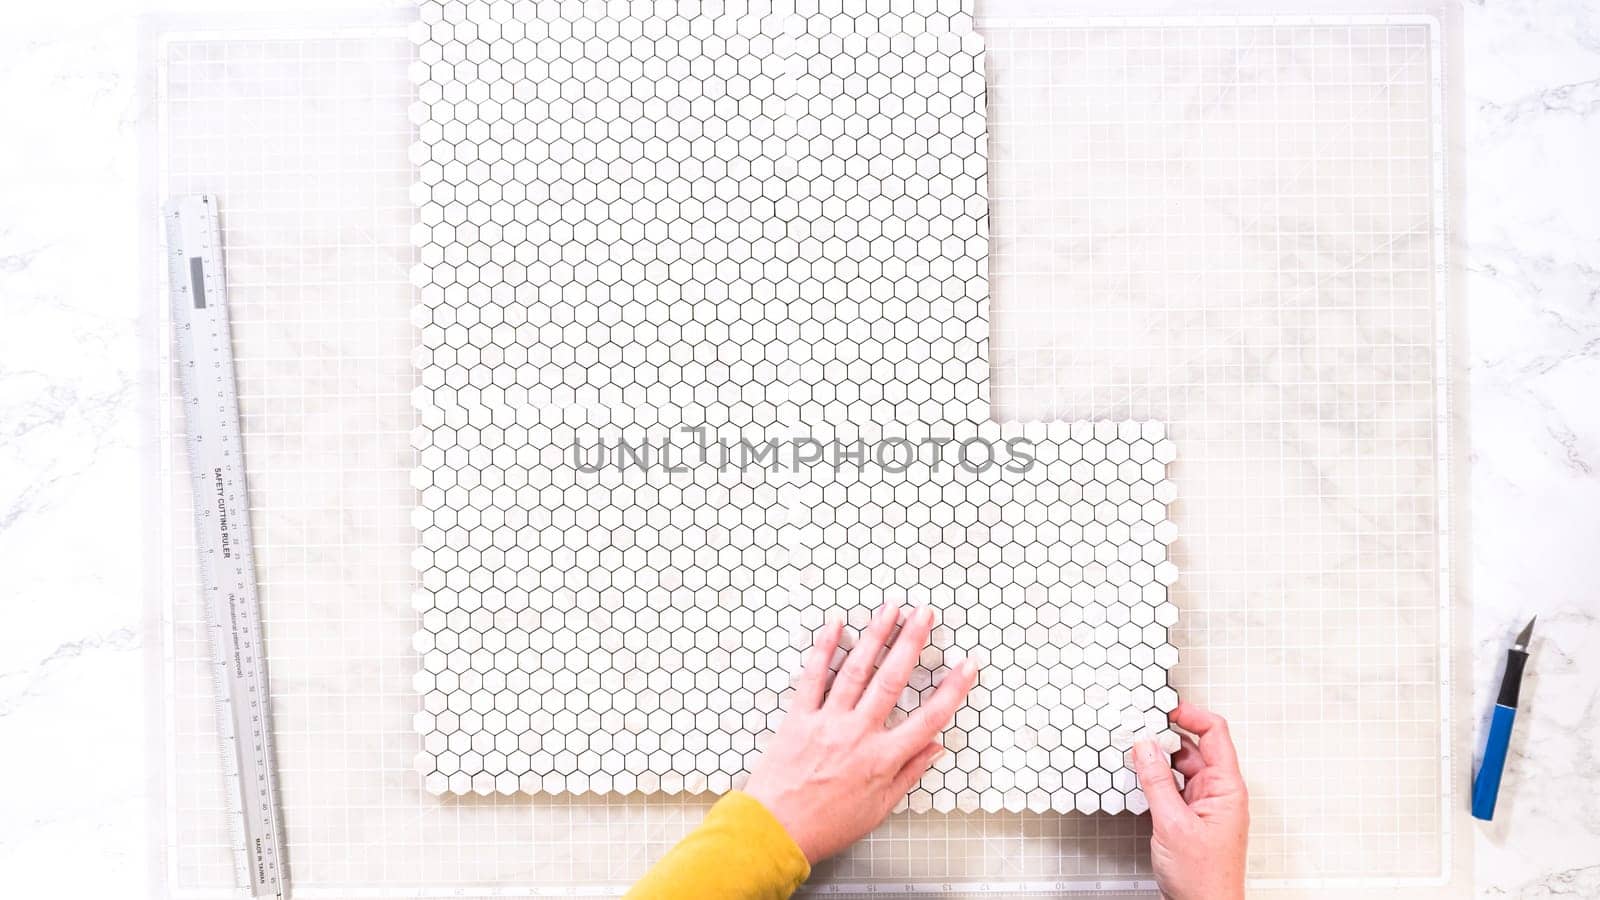 Flat lay. In the process of mounting peel and stick mosaic tiles onto a foam board, perfect for enhancing a food photography studio's aesthetic.